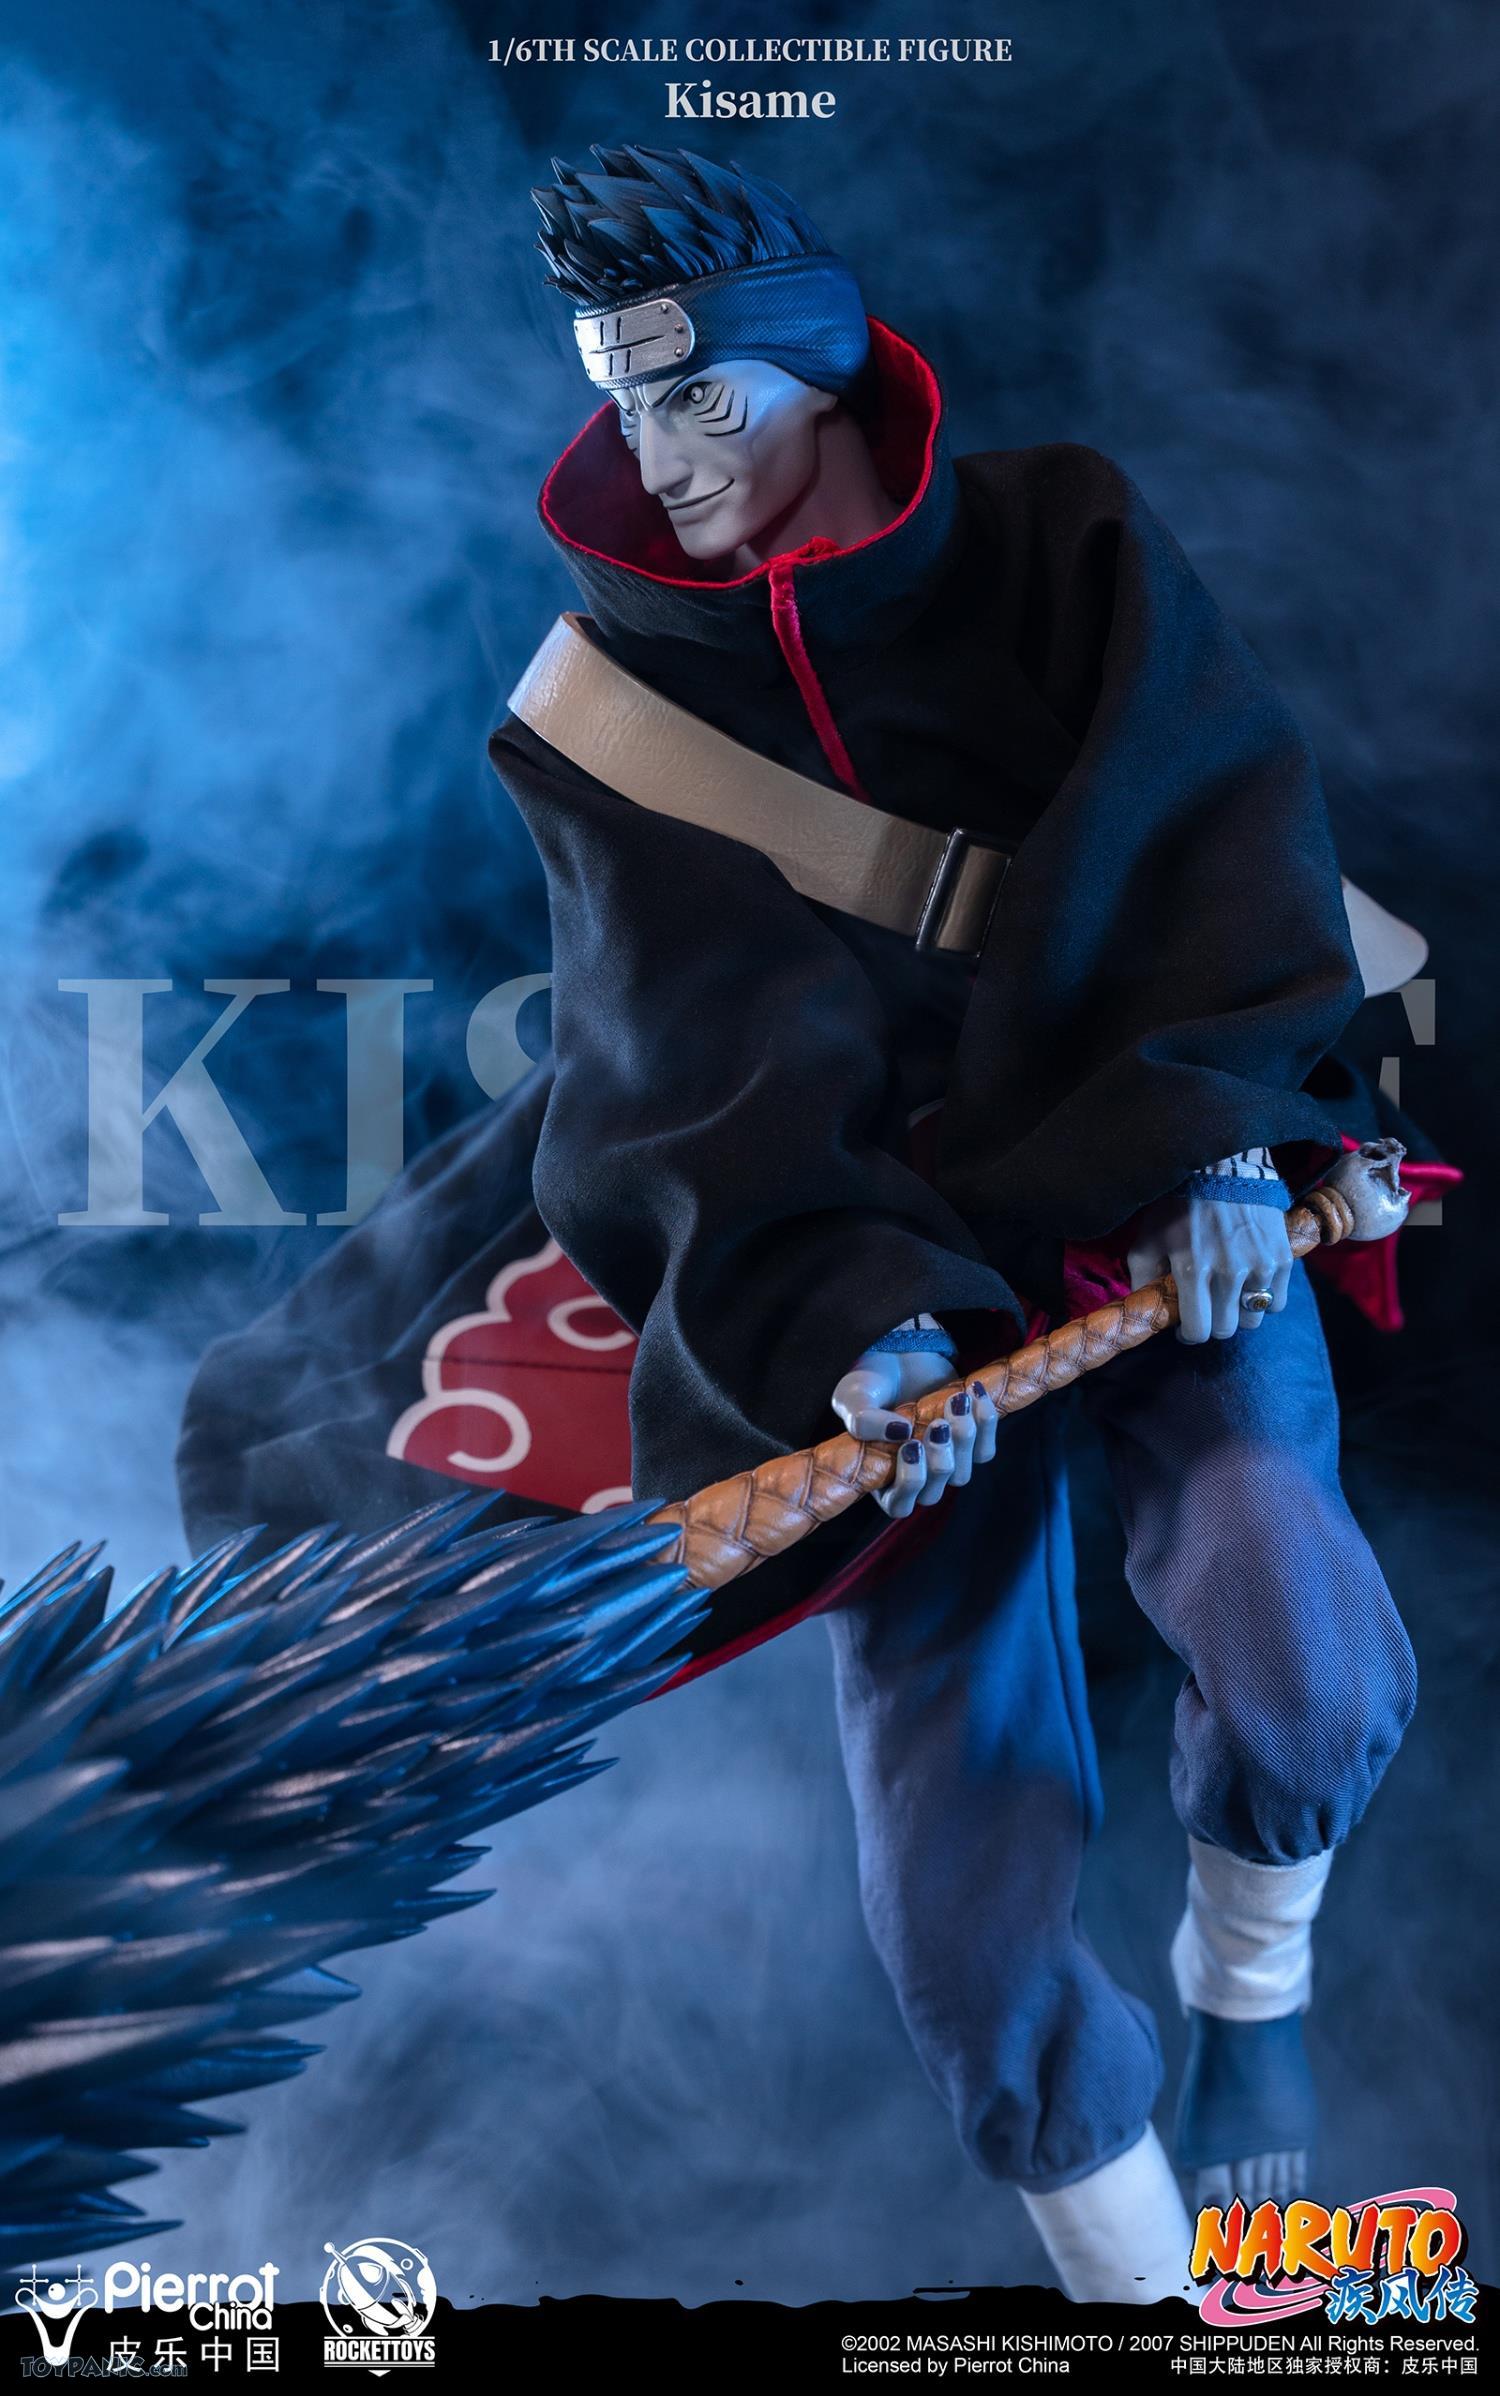 Fantasy - NEW PRODUCT: Rocket Toys ROC-007 1/6 Scale Kisame 221202460436PM_2163868